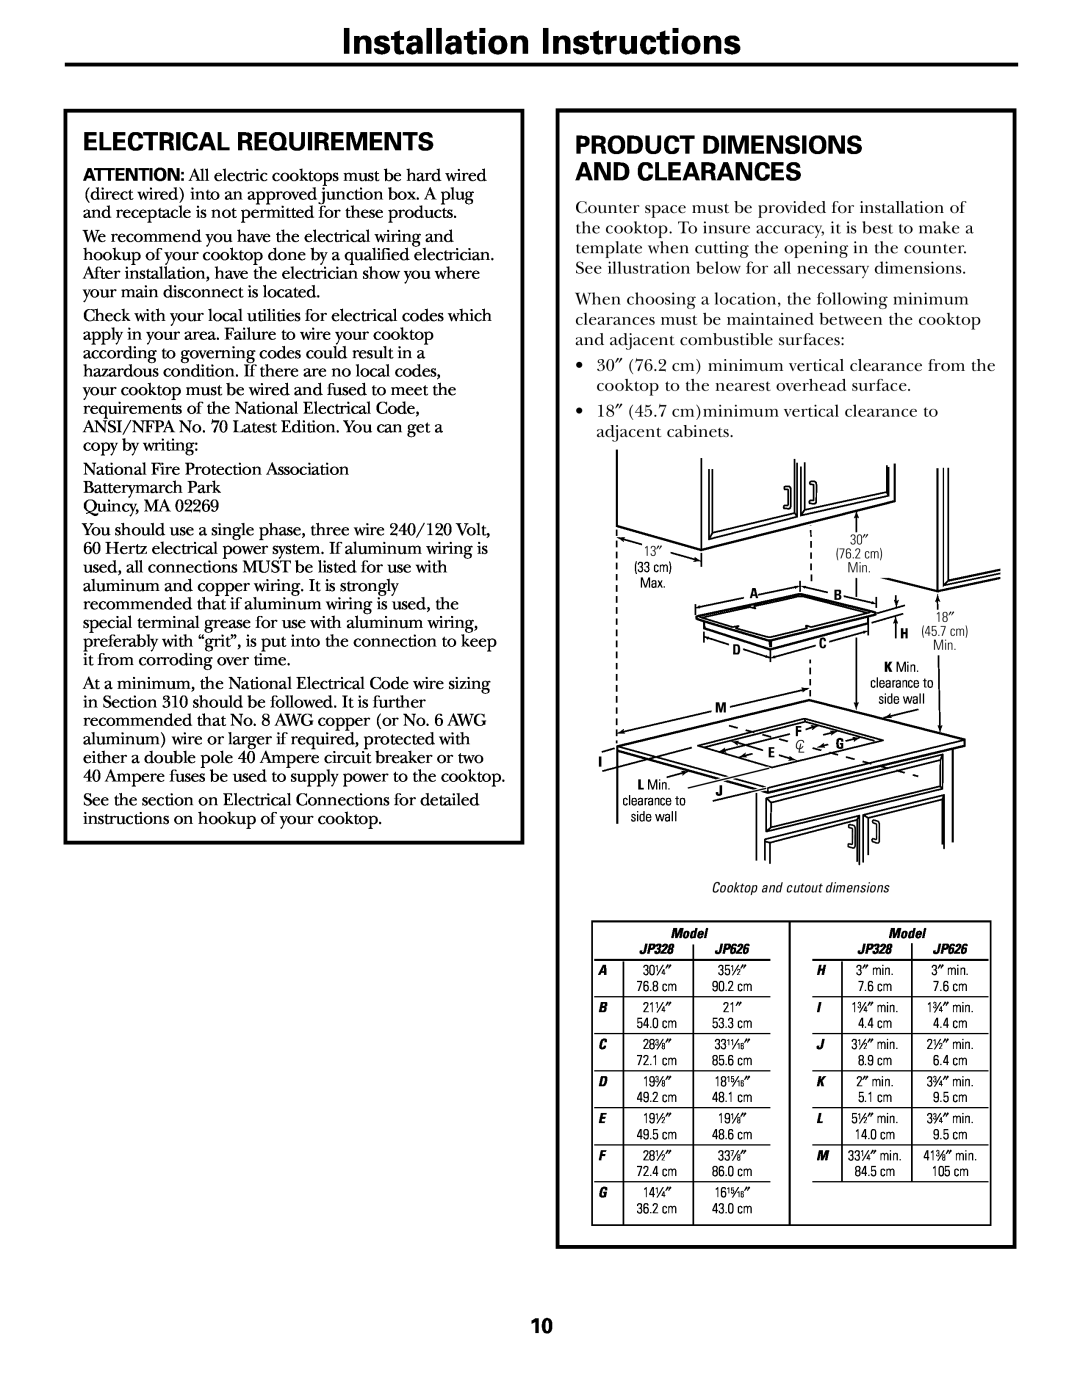 Hilti JP626, JP328 owner manual Installation Instructions, Electrical Requirements, Product Dimensions And Clearances 